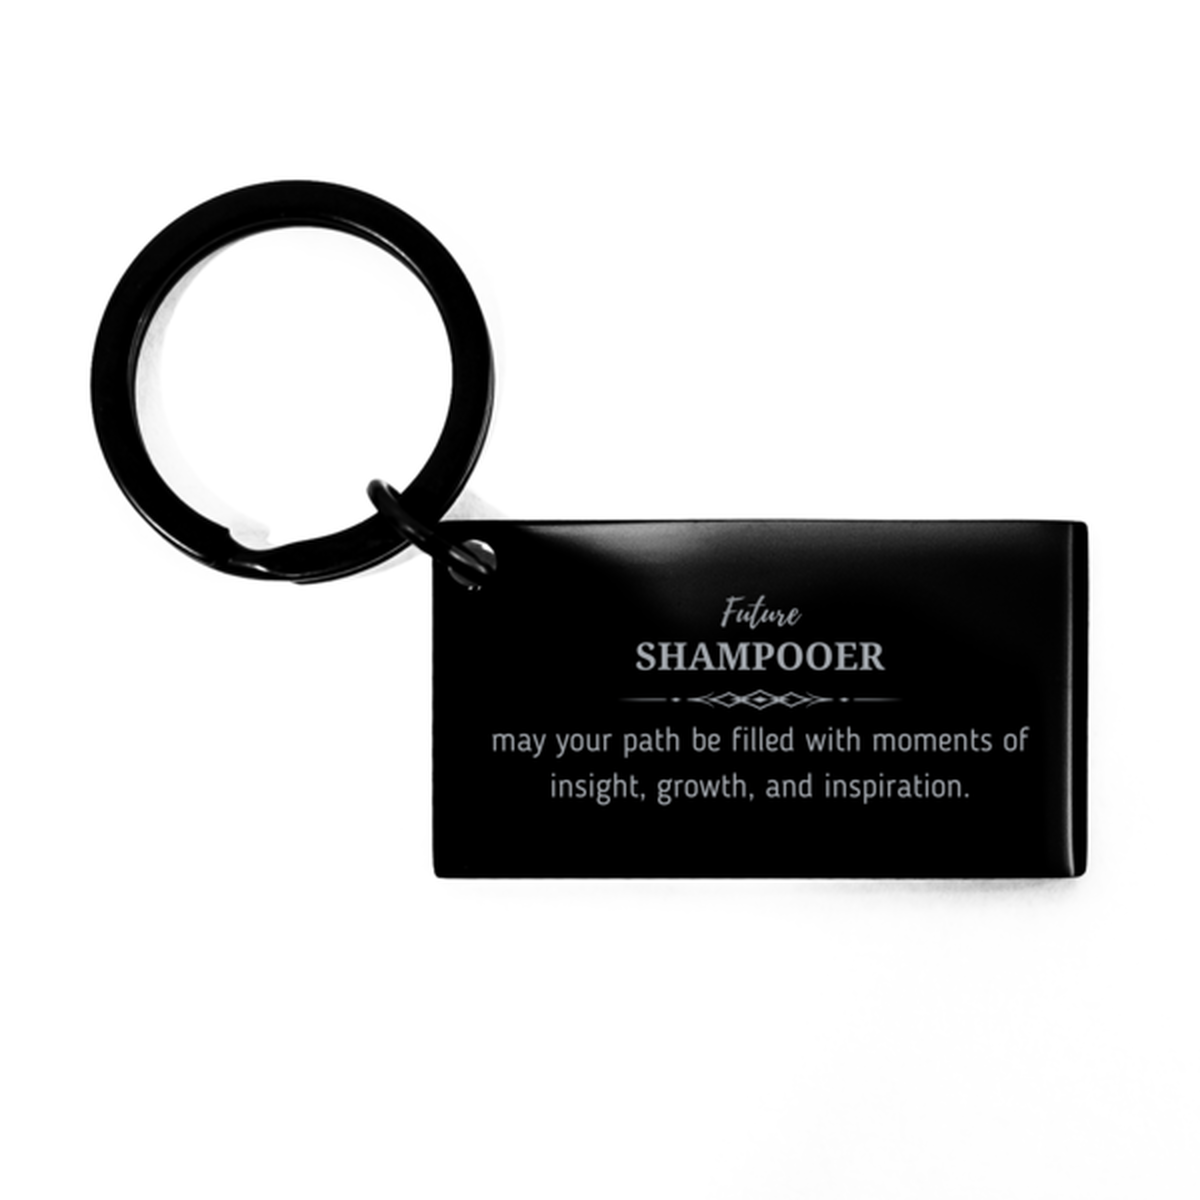 Future Shampooer Gifts, May your path be filled with moments of insight, Graduation Gifts for New Shampooer, Christmas Unique Keychain For Men, Women, Friends